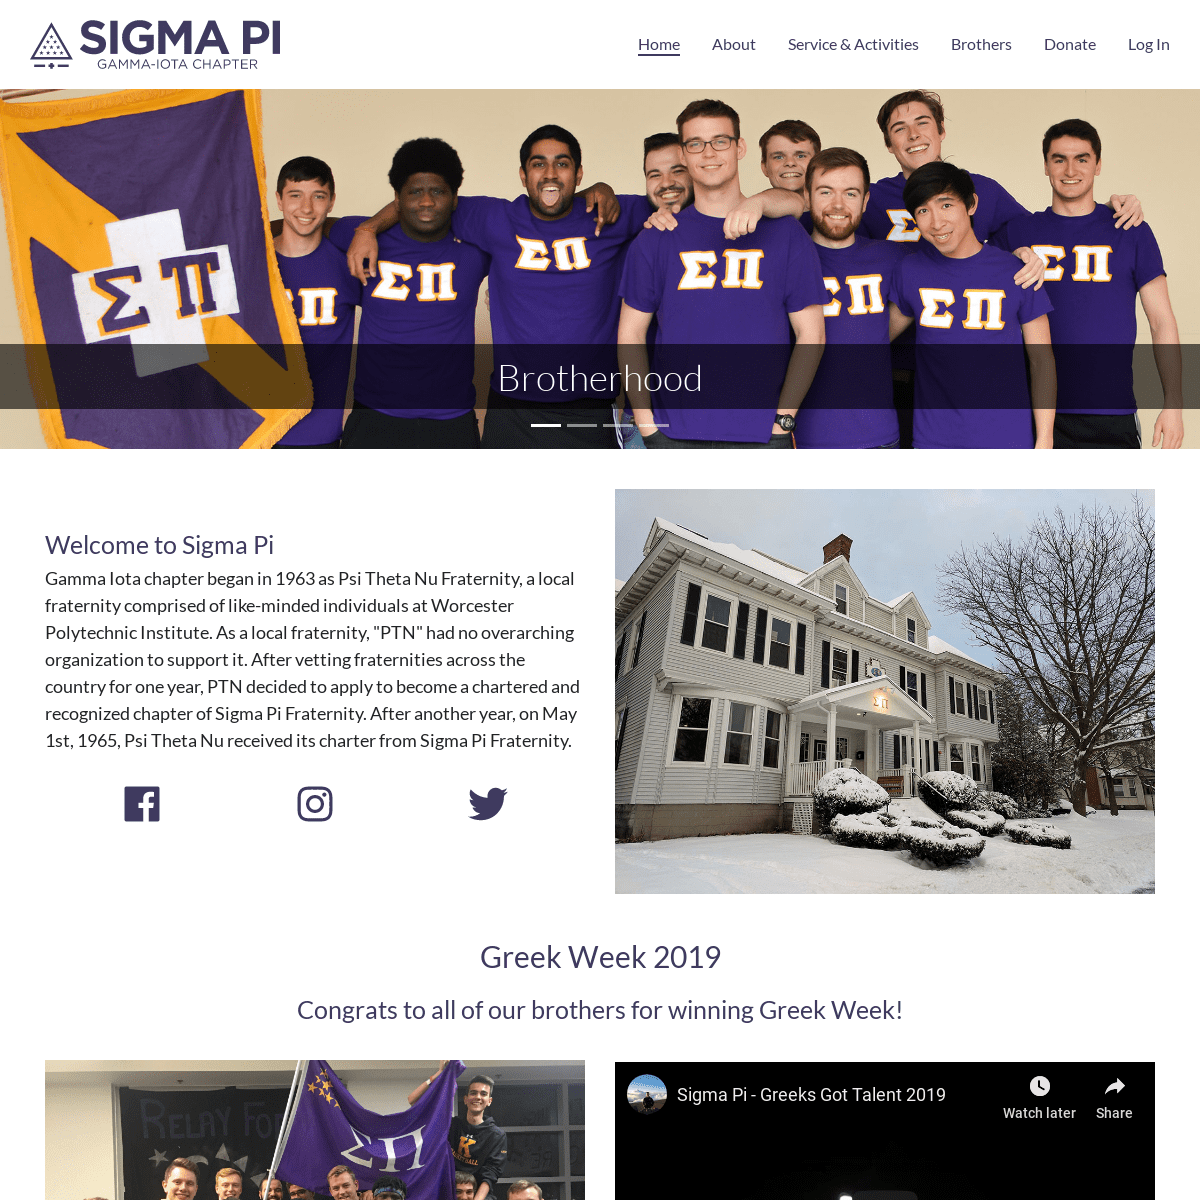 A complete backup of sigmapigammaiota.org